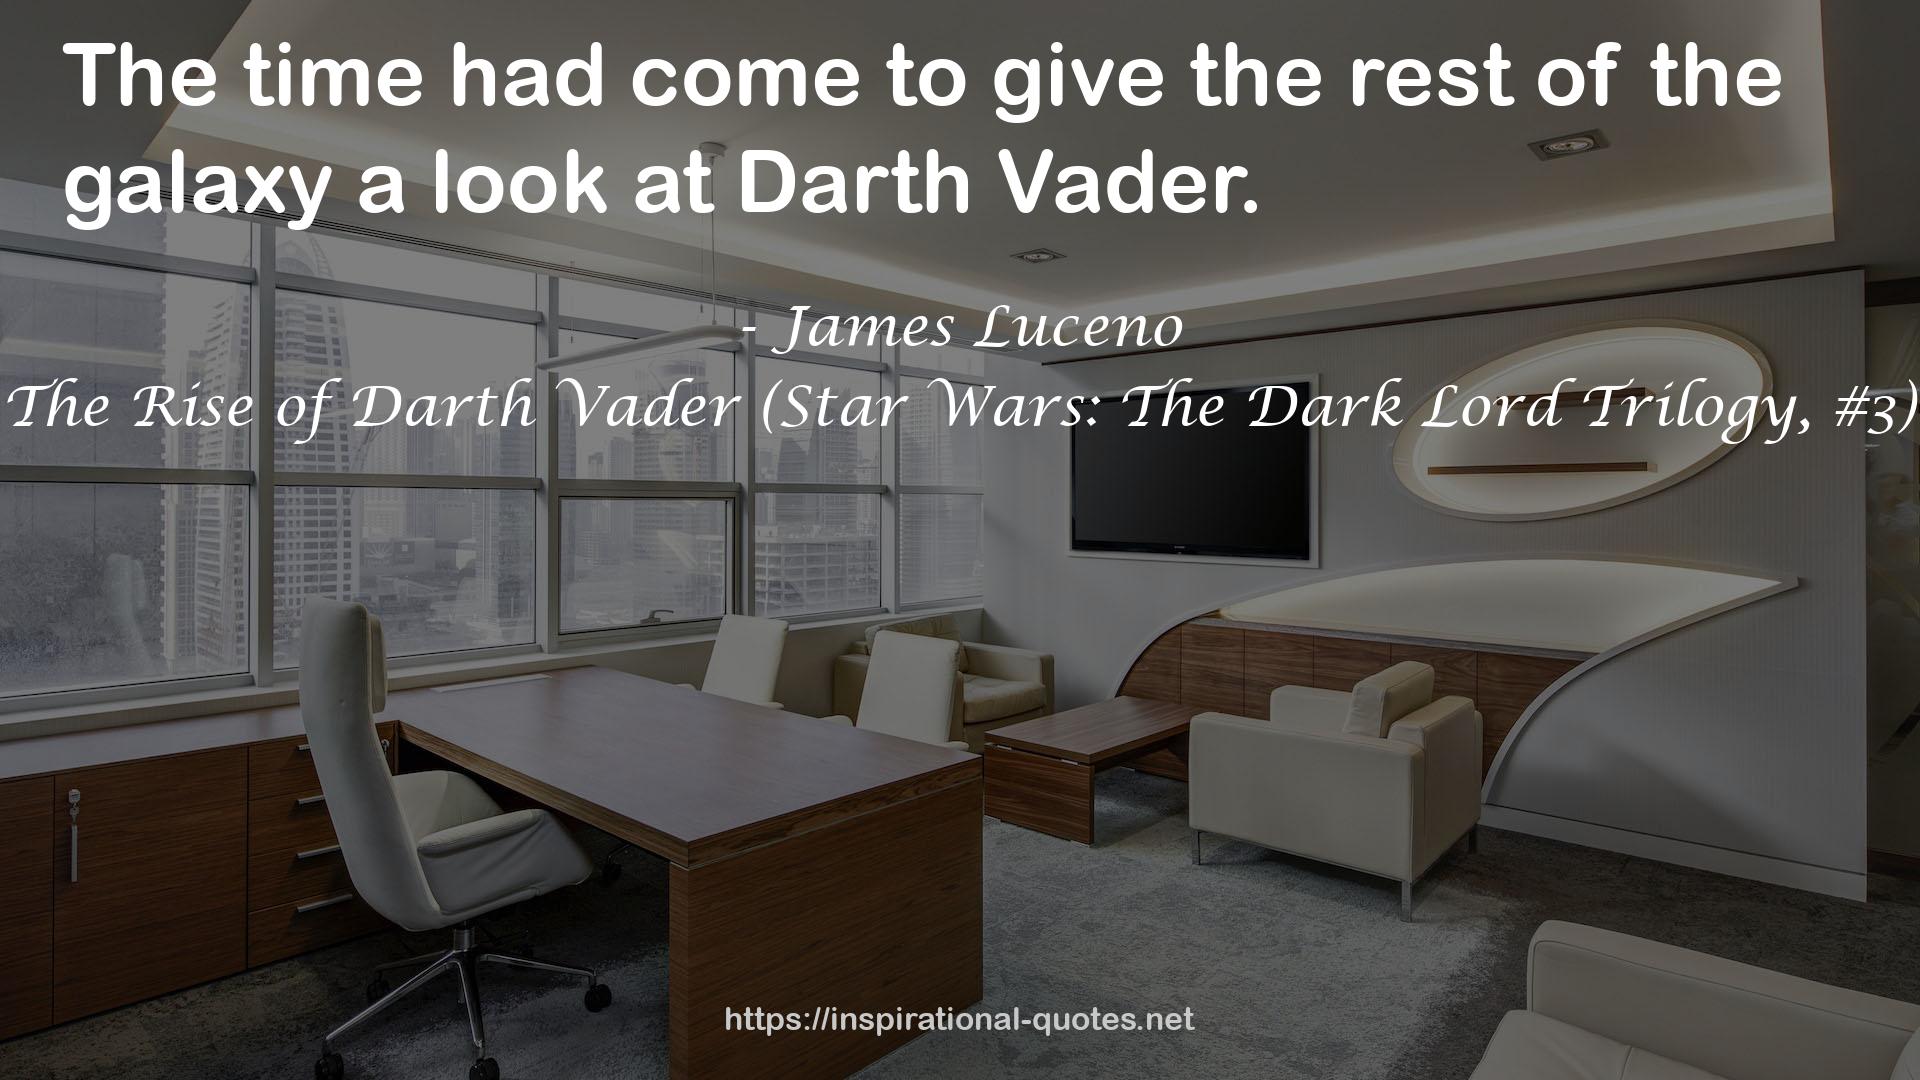 The Rise of Darth Vader (Star Wars: The Dark Lord Trilogy, #3) QUOTES